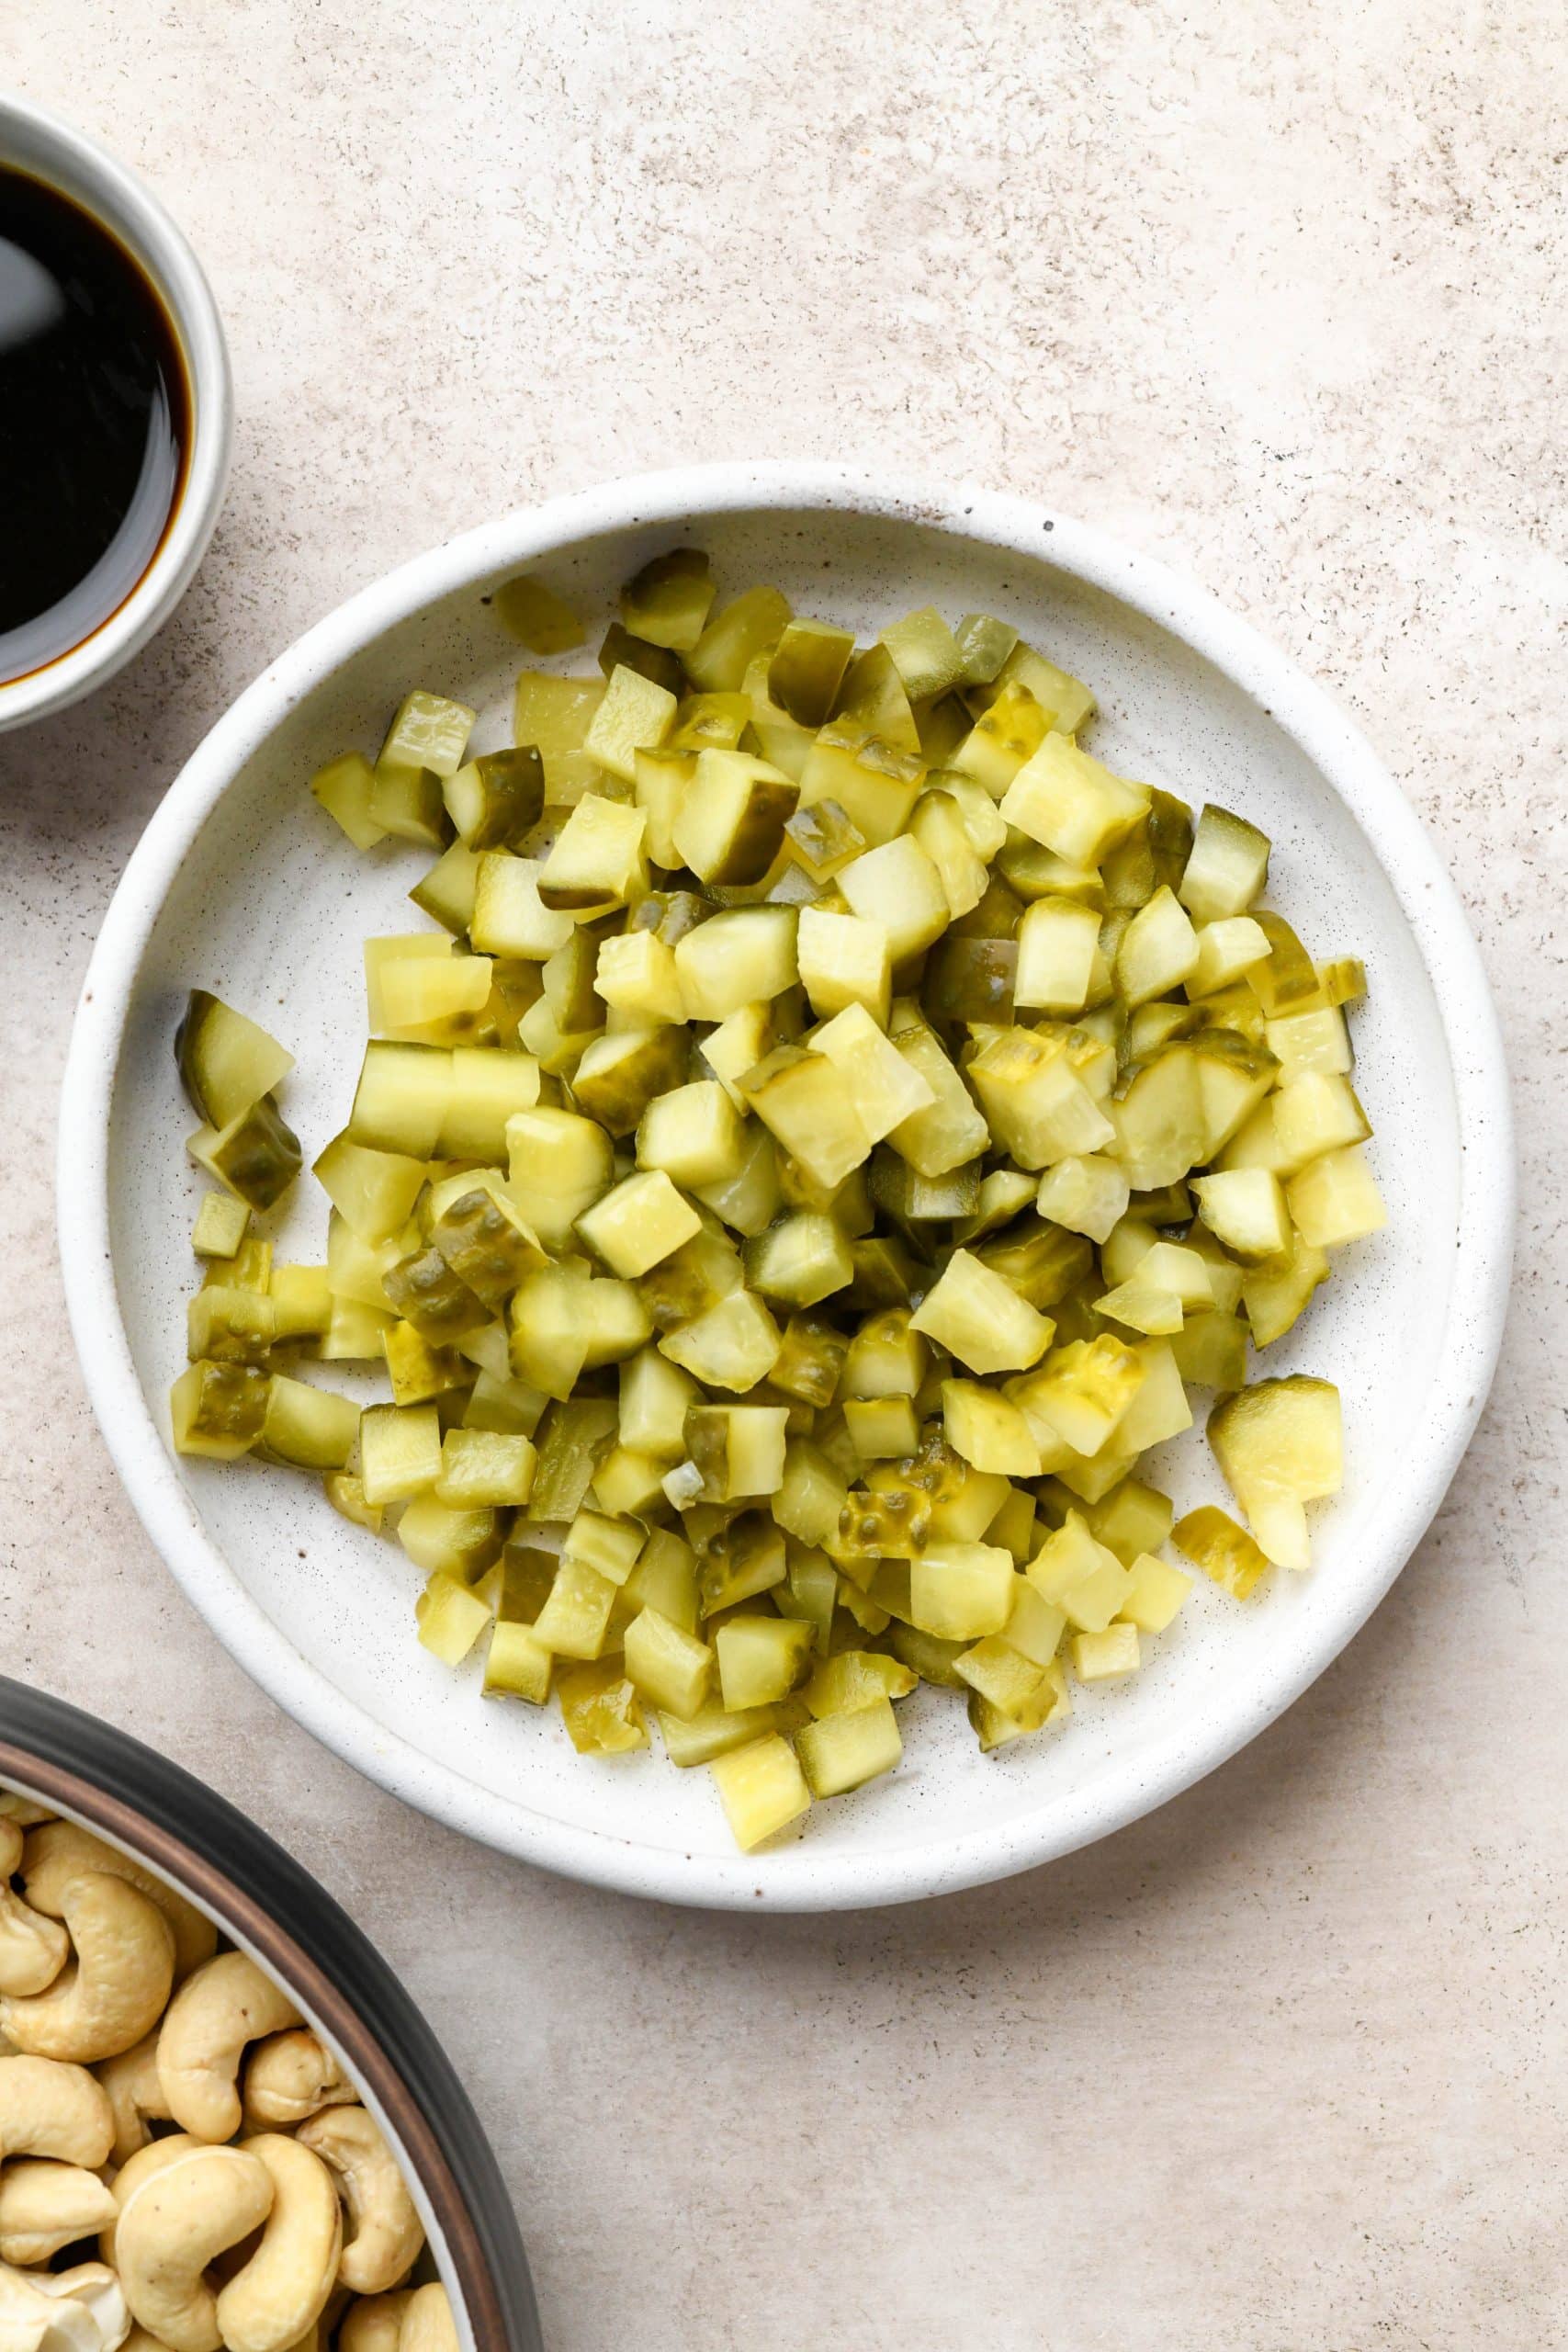 Diced pickles in a small ceramic bowl for dill pickle dip.